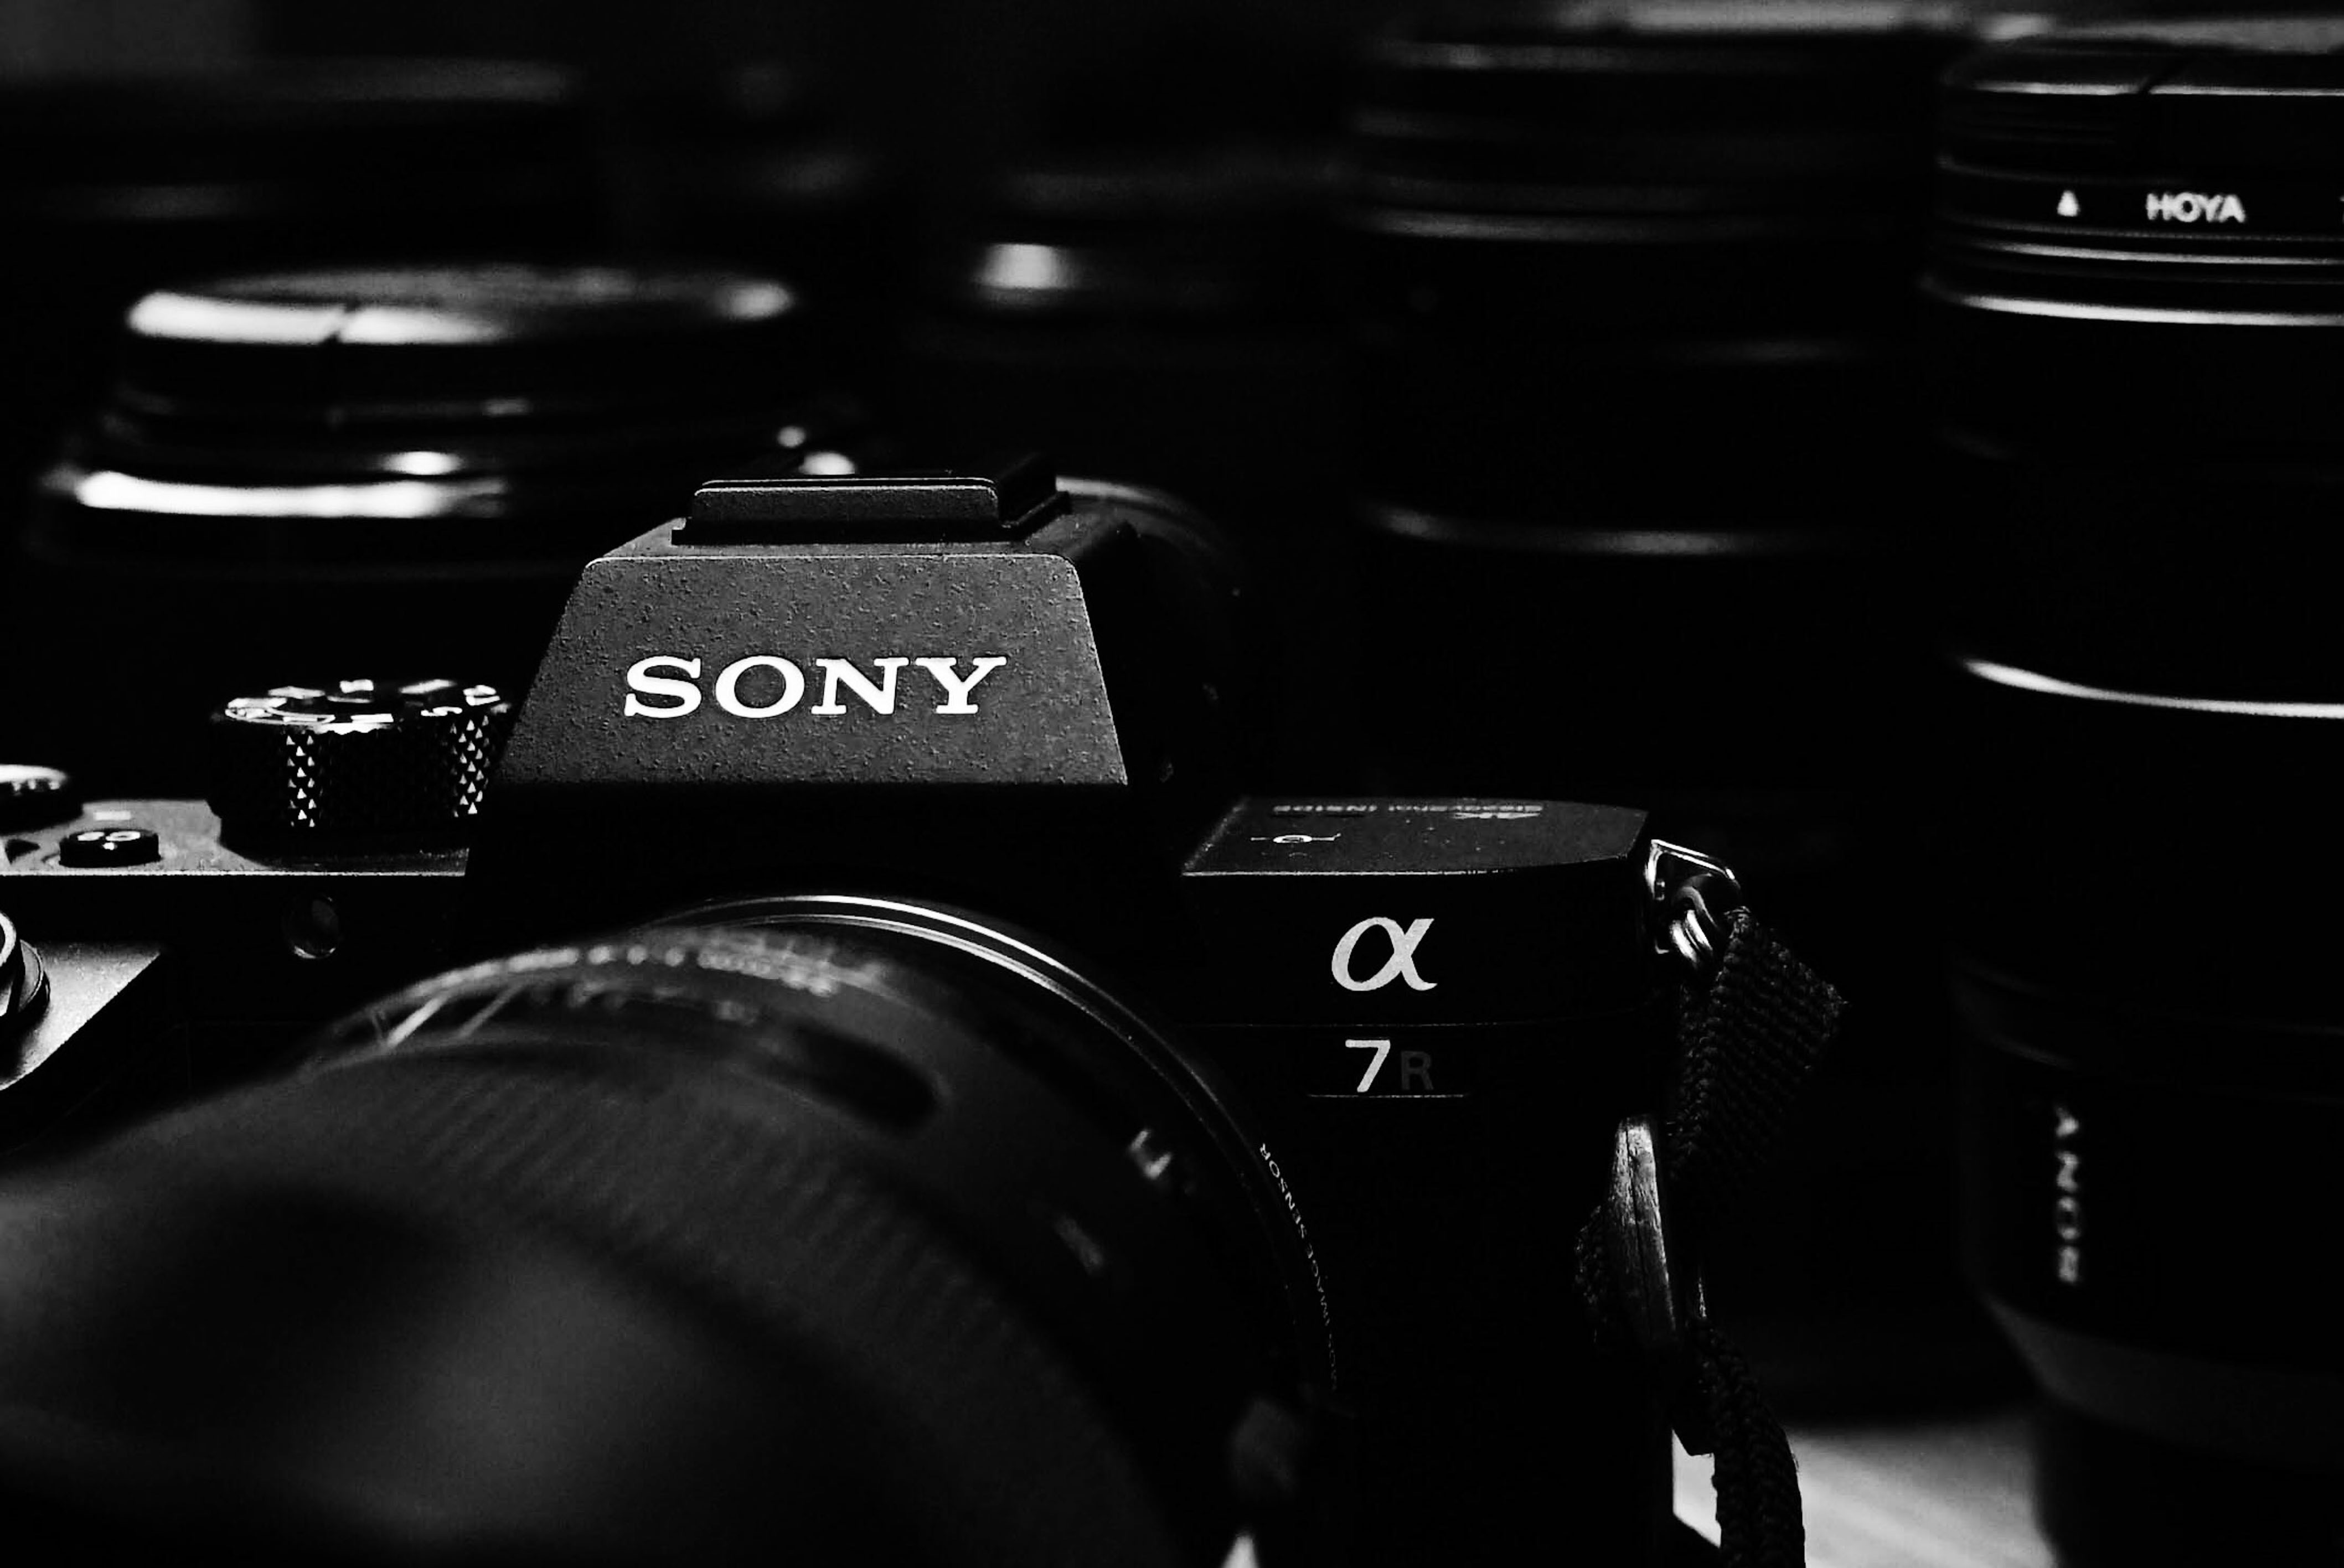 Sony A1 - What a Beast!